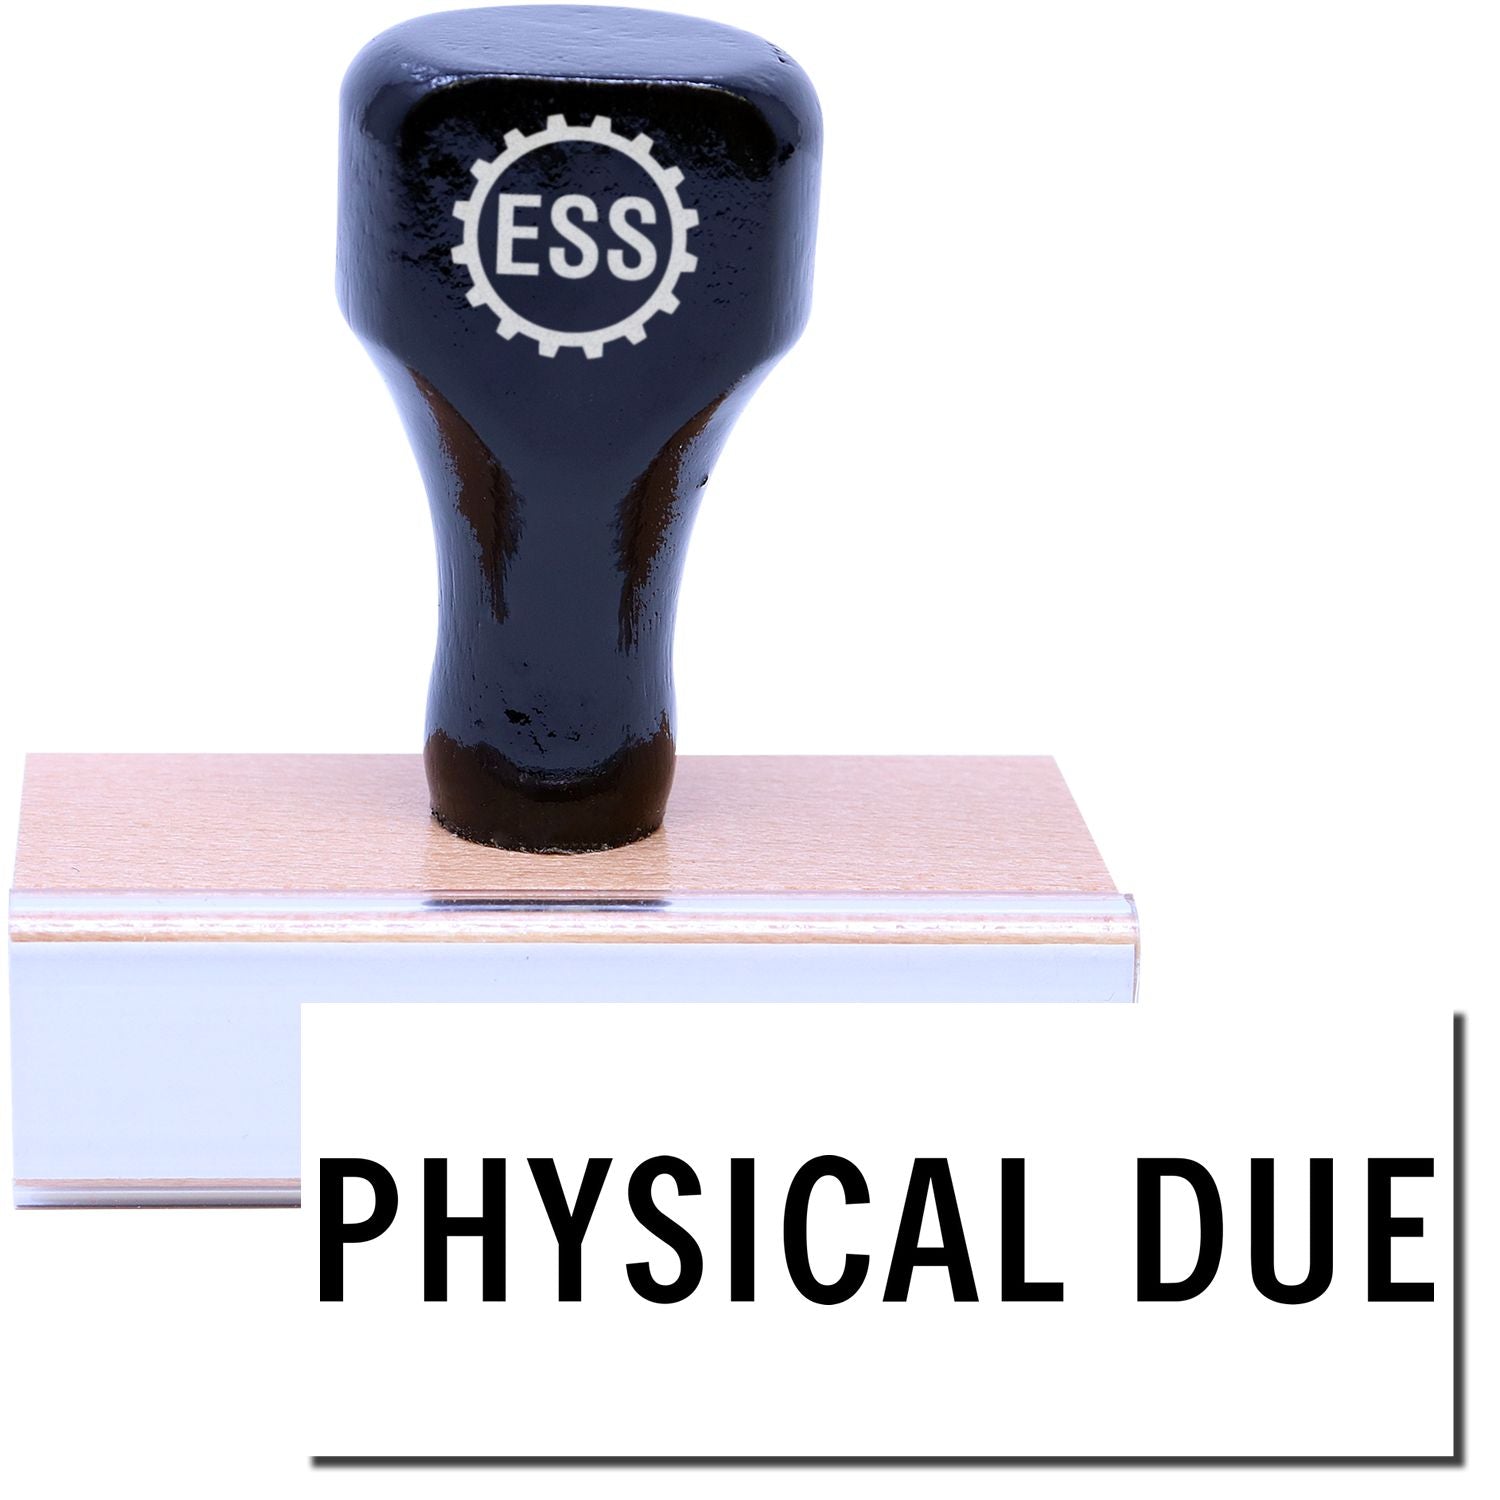 A stock office rubber stamp with a stamped image showing how the text "PHYSICAL DUE" in a large font is displayed after stamping.